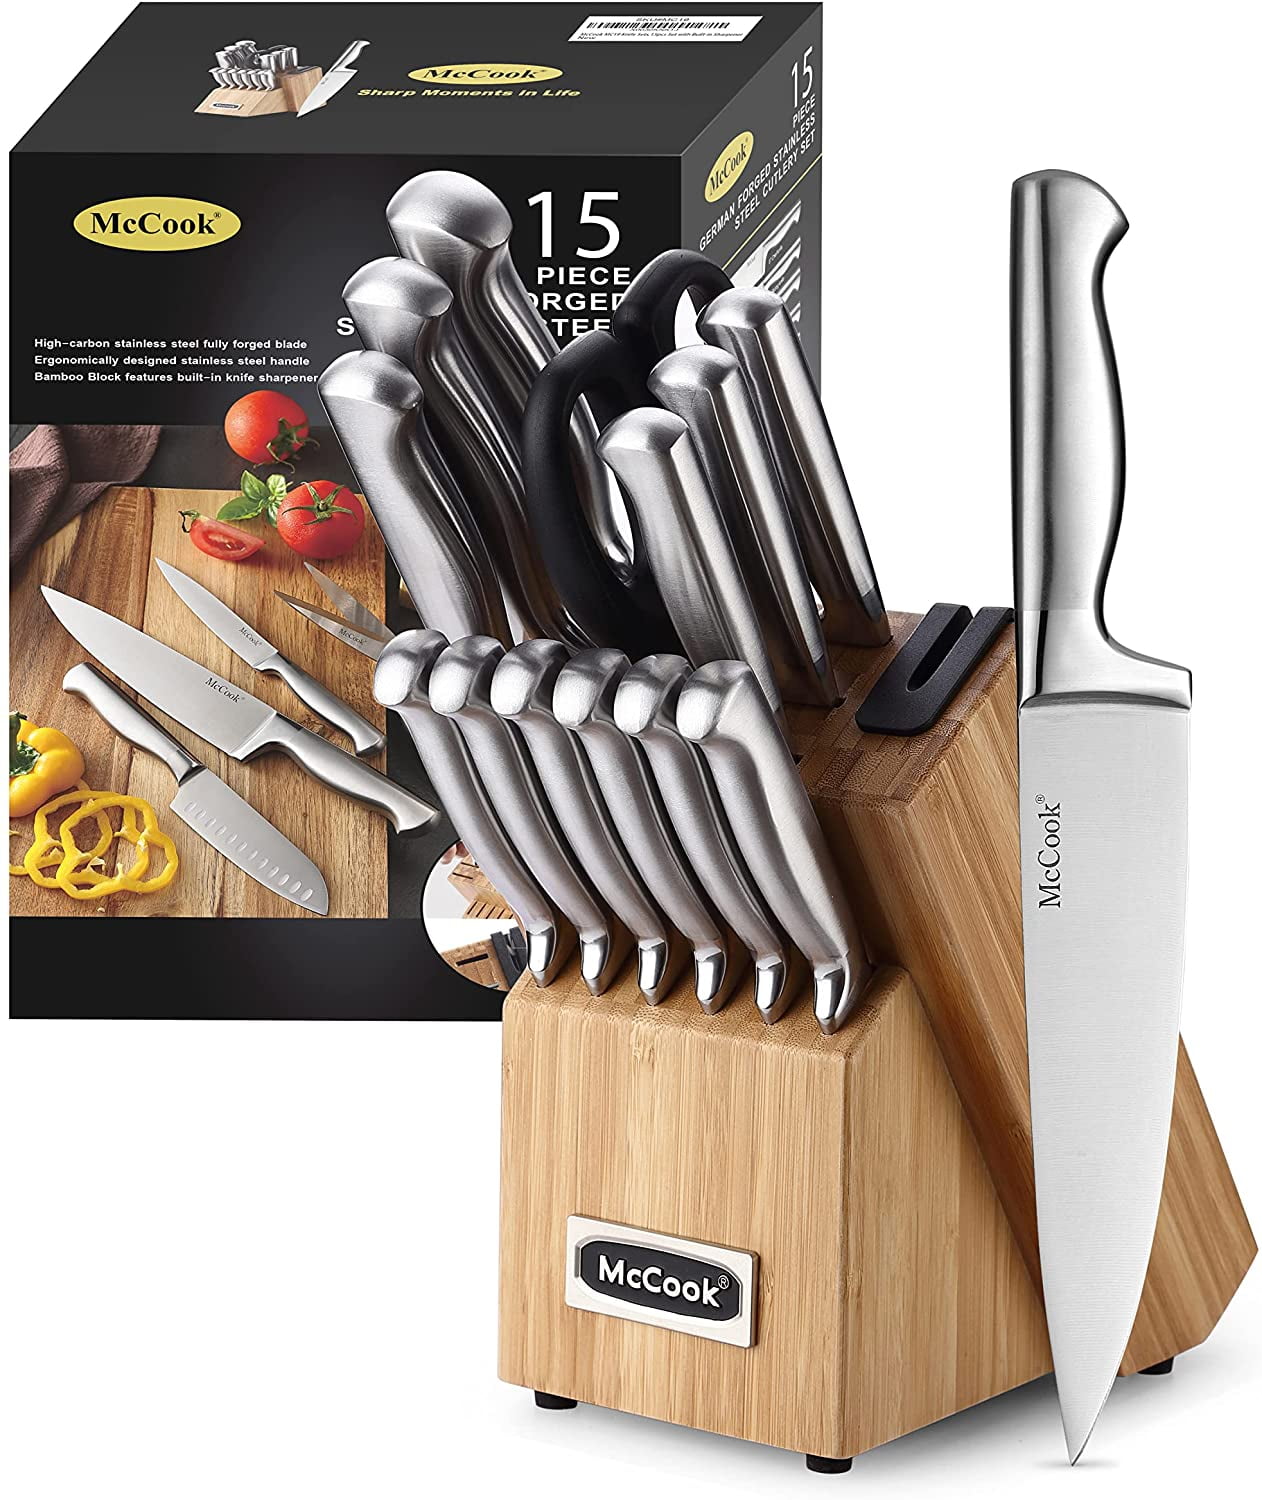 McCook 15-Piece Stainless Steel Knife Set,MC19 Knife Block Set with  Built-in Sharpener,Chef Knife for Home 